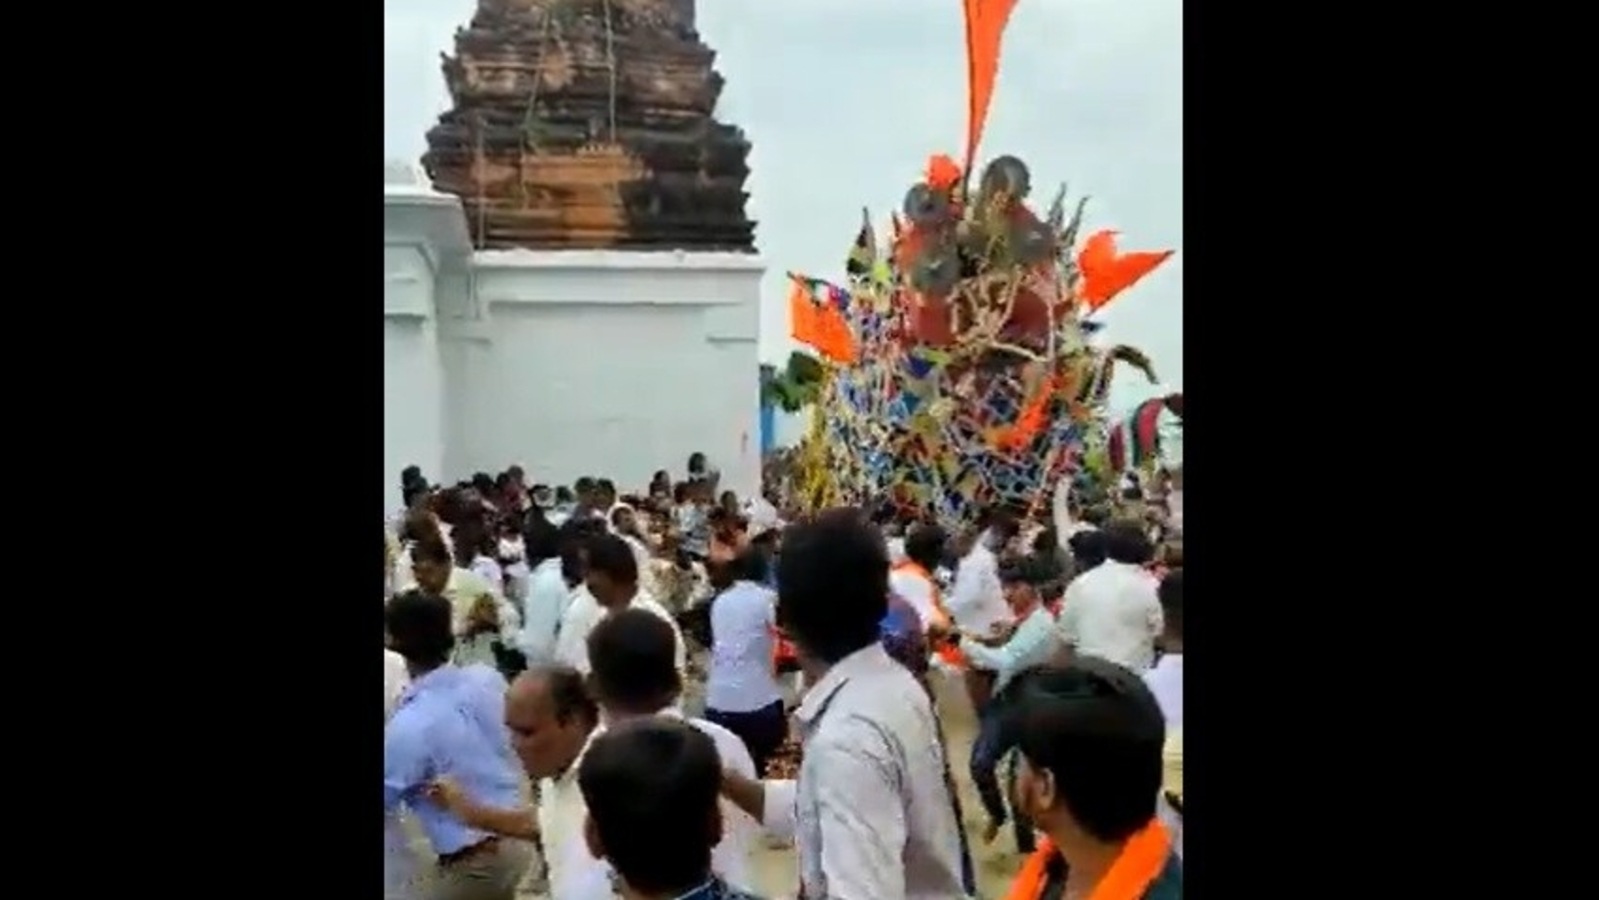 on-camera-temple-chariot-falls-on-devotees-during-procession-in-karnataka